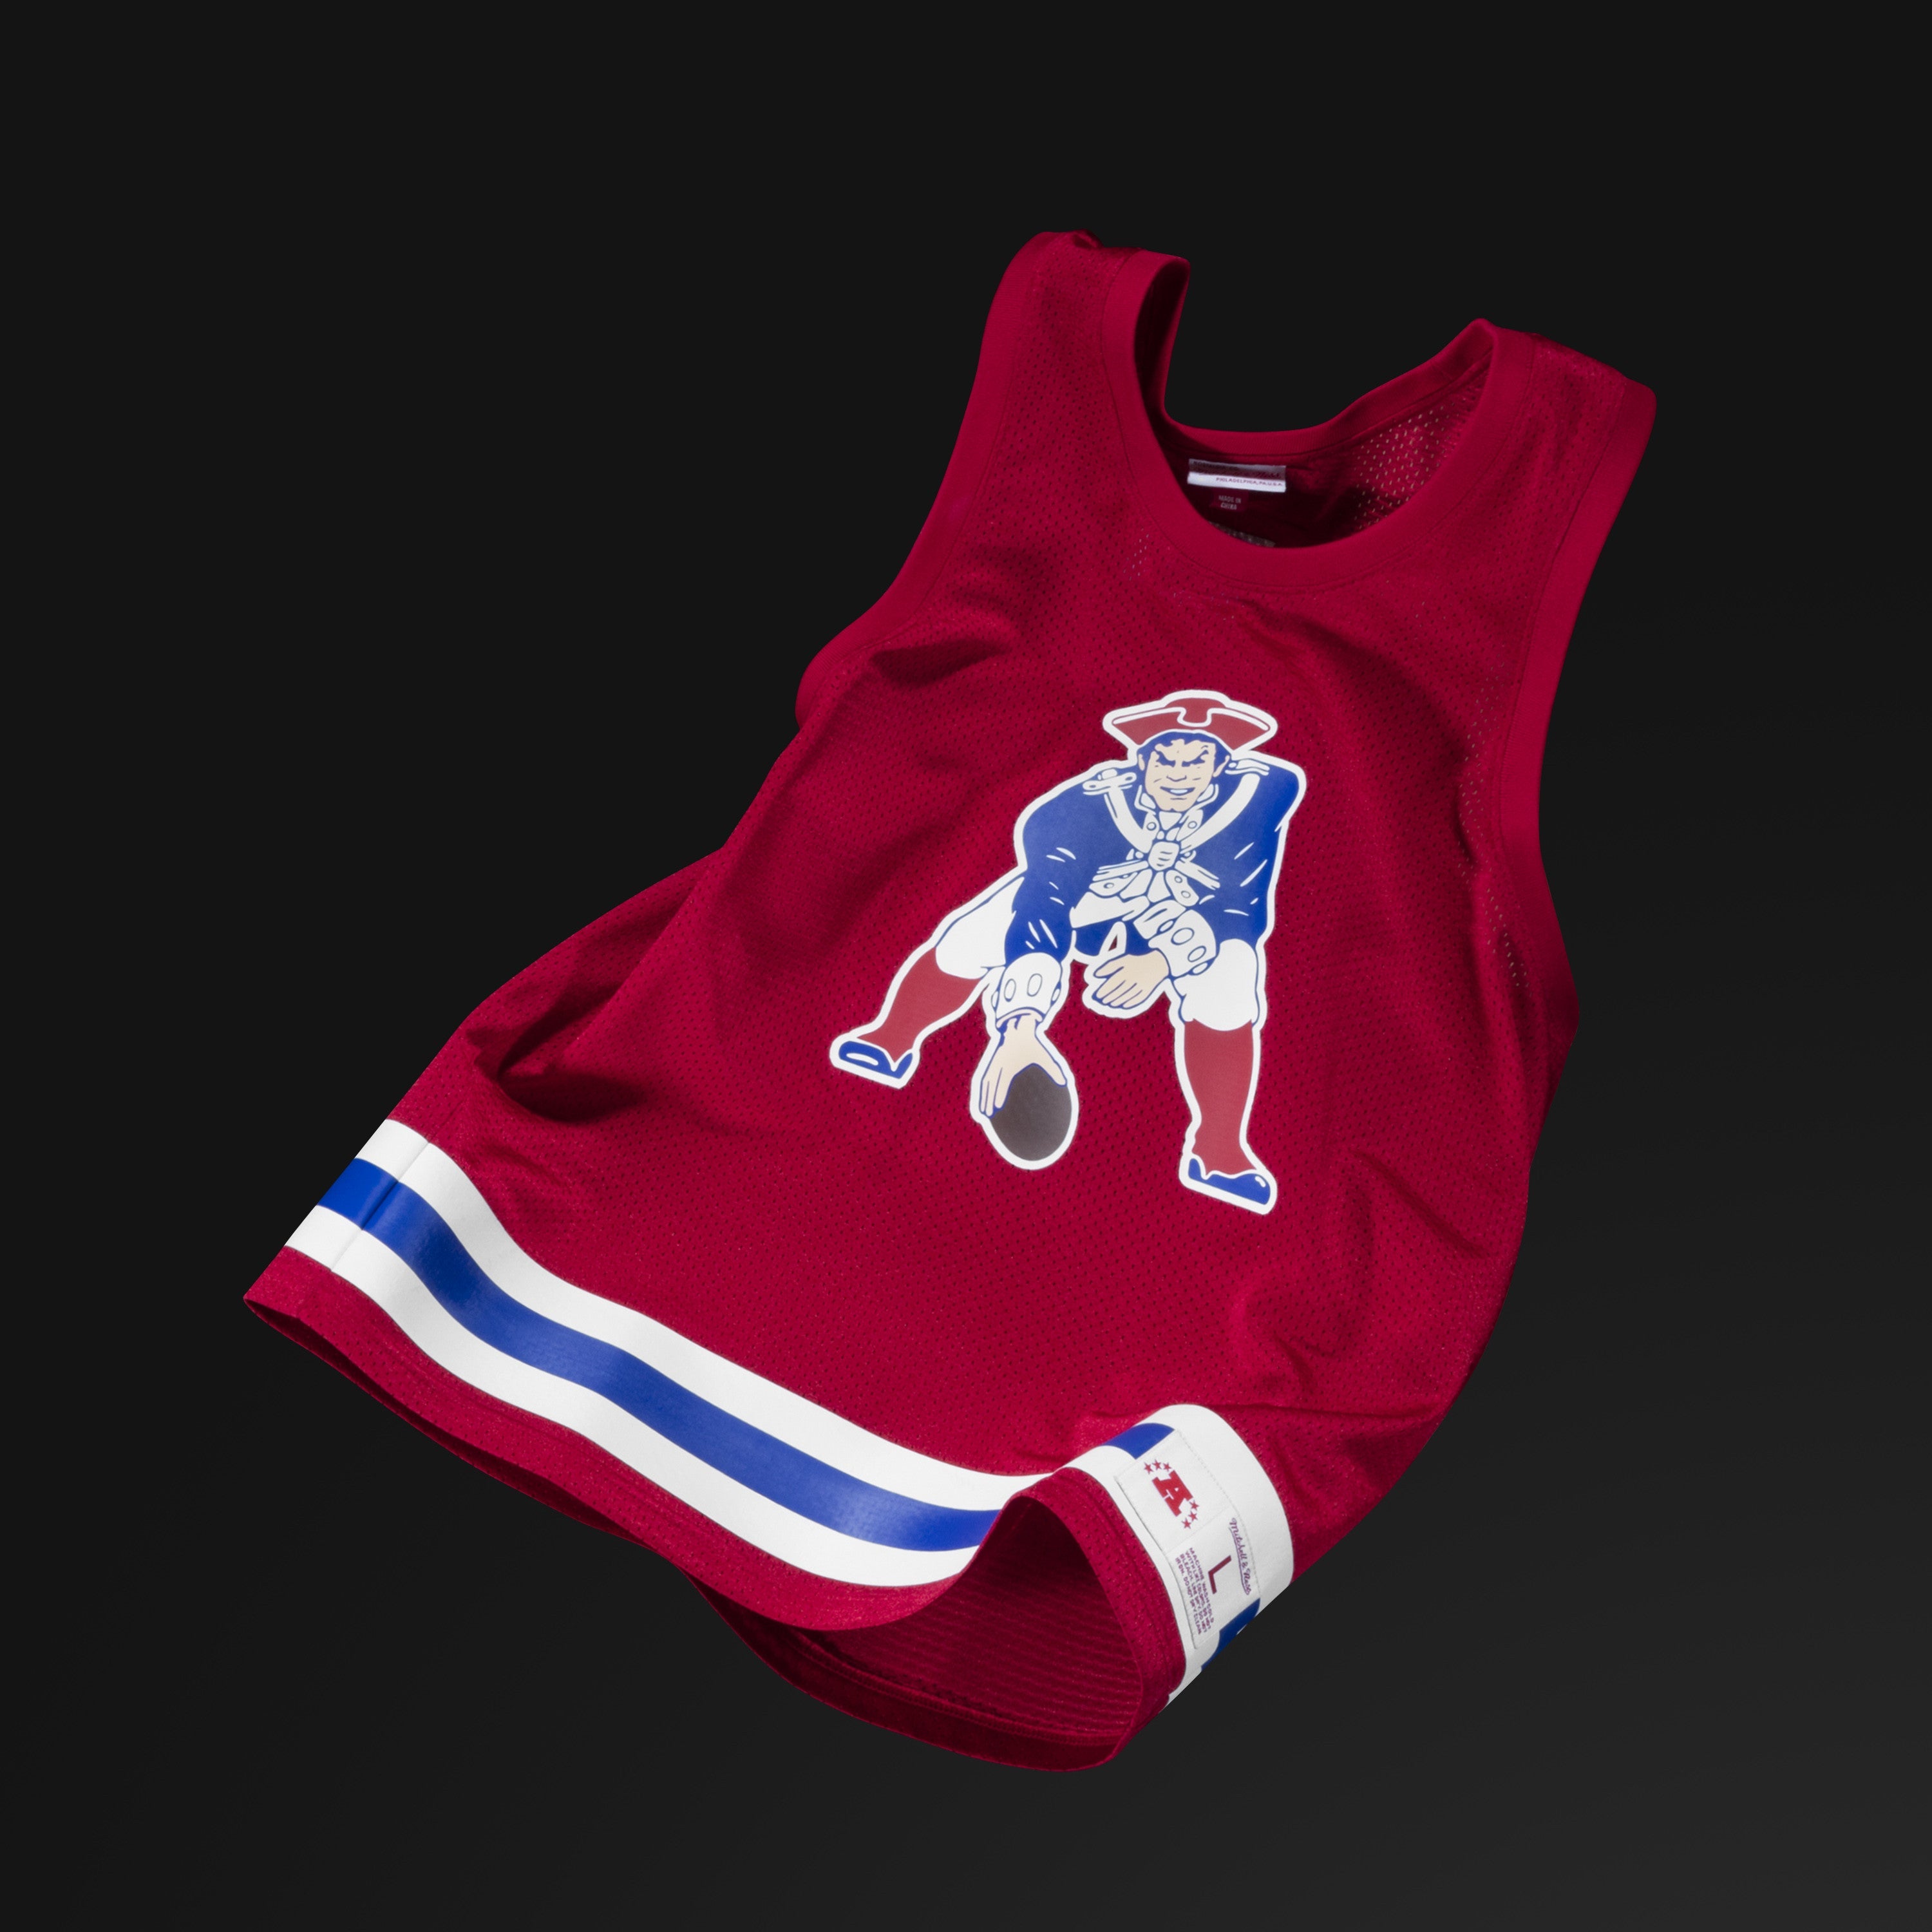 Mitchell & Ness Jerseys are Made for Summer - Lids